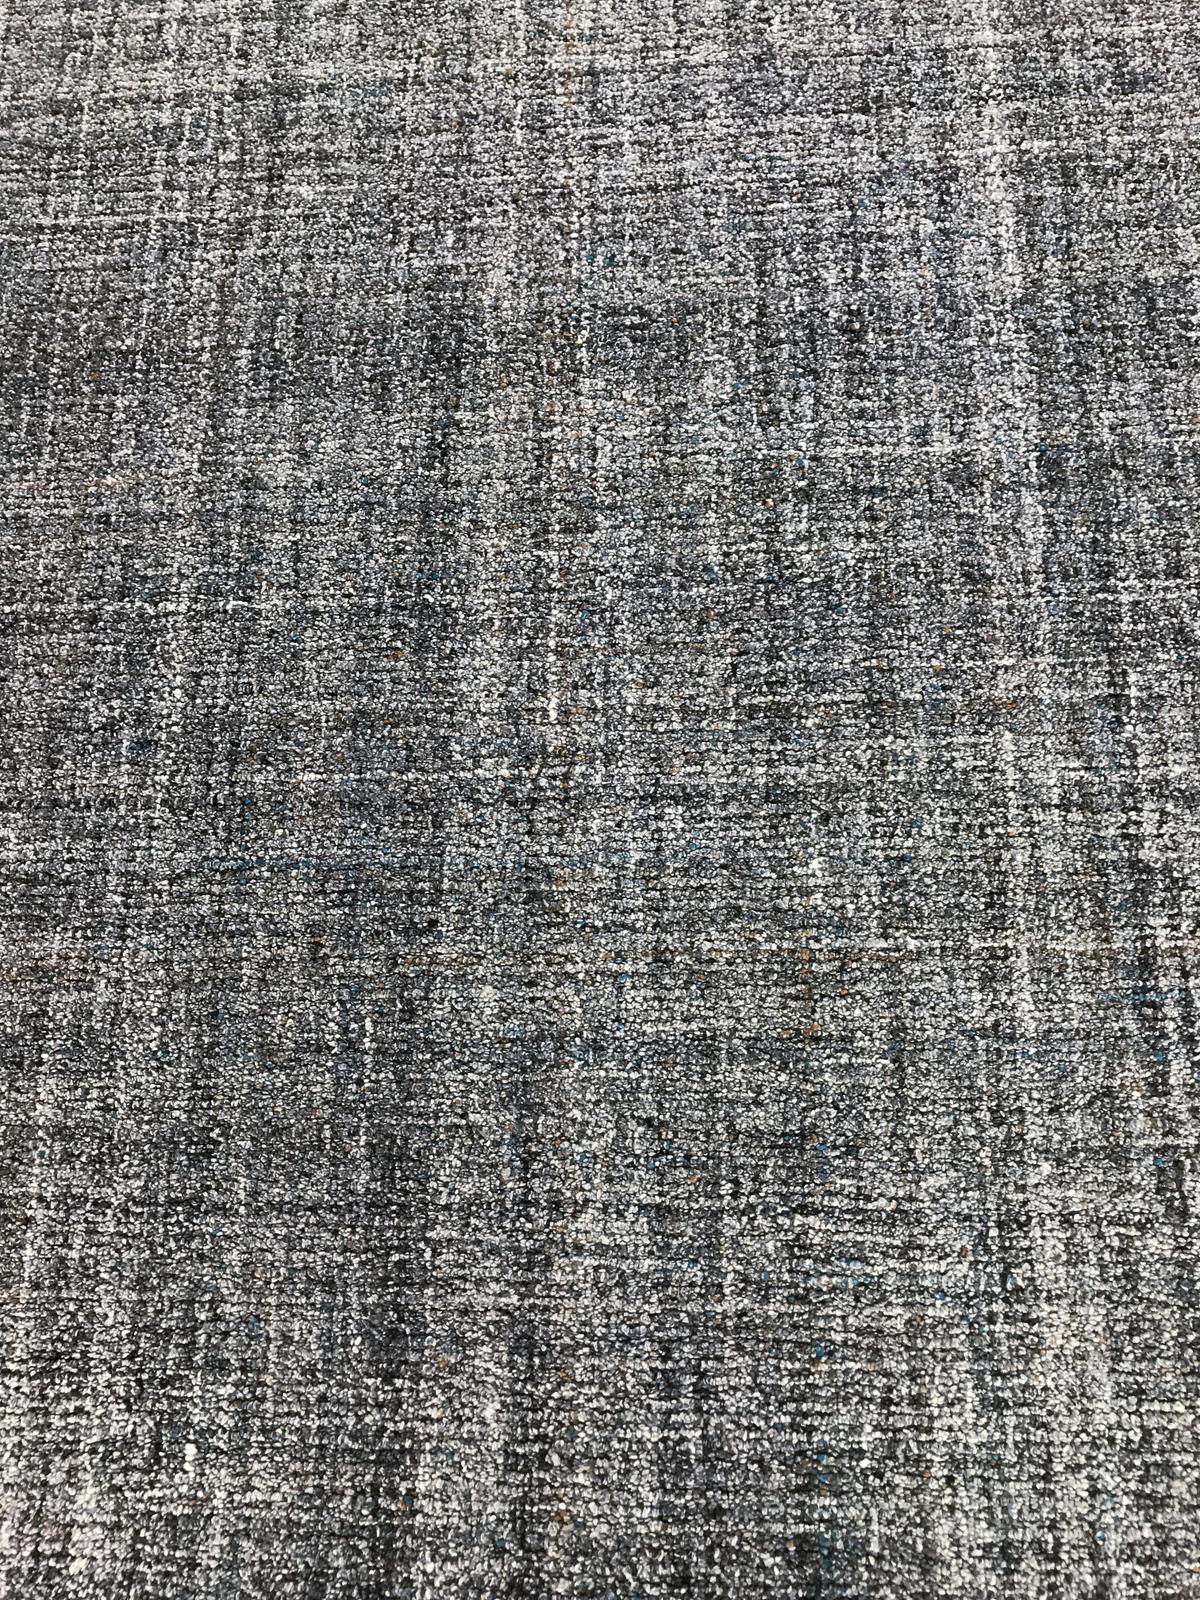 Tufted Gray Indian Wool Area Rug 1